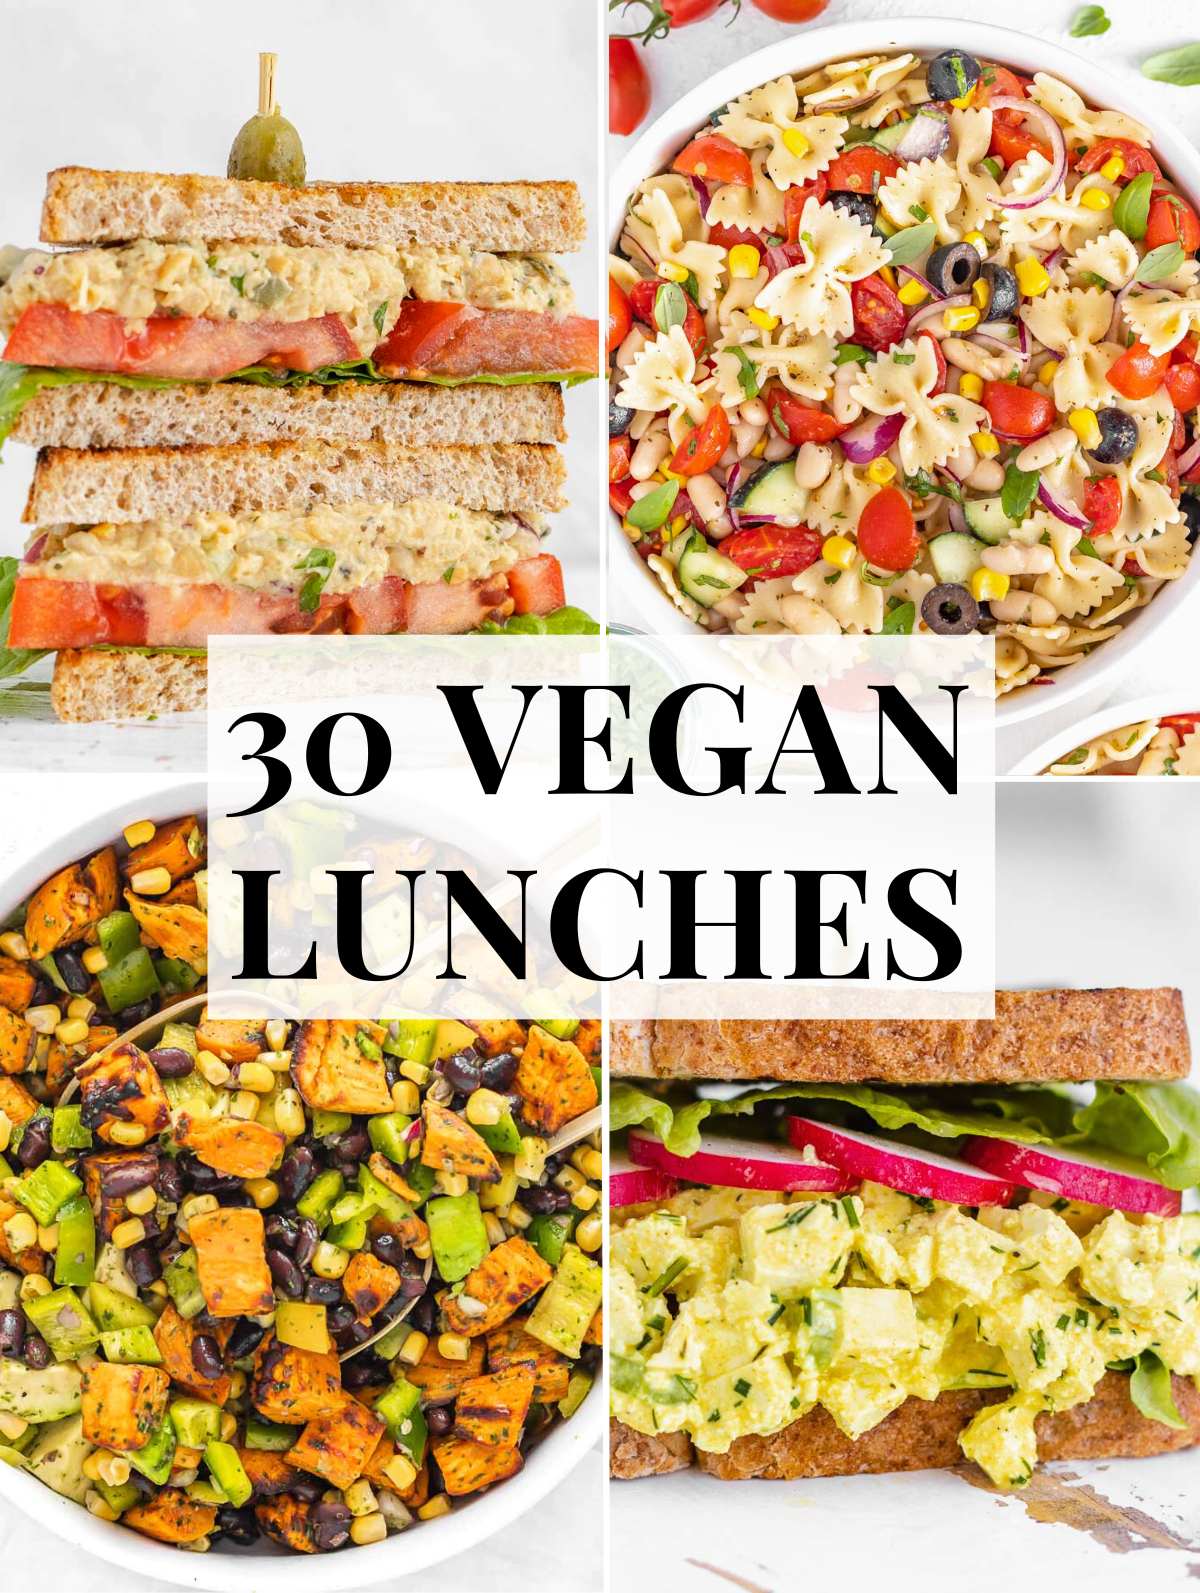 Vegan lunch ideas with sandwich and salad